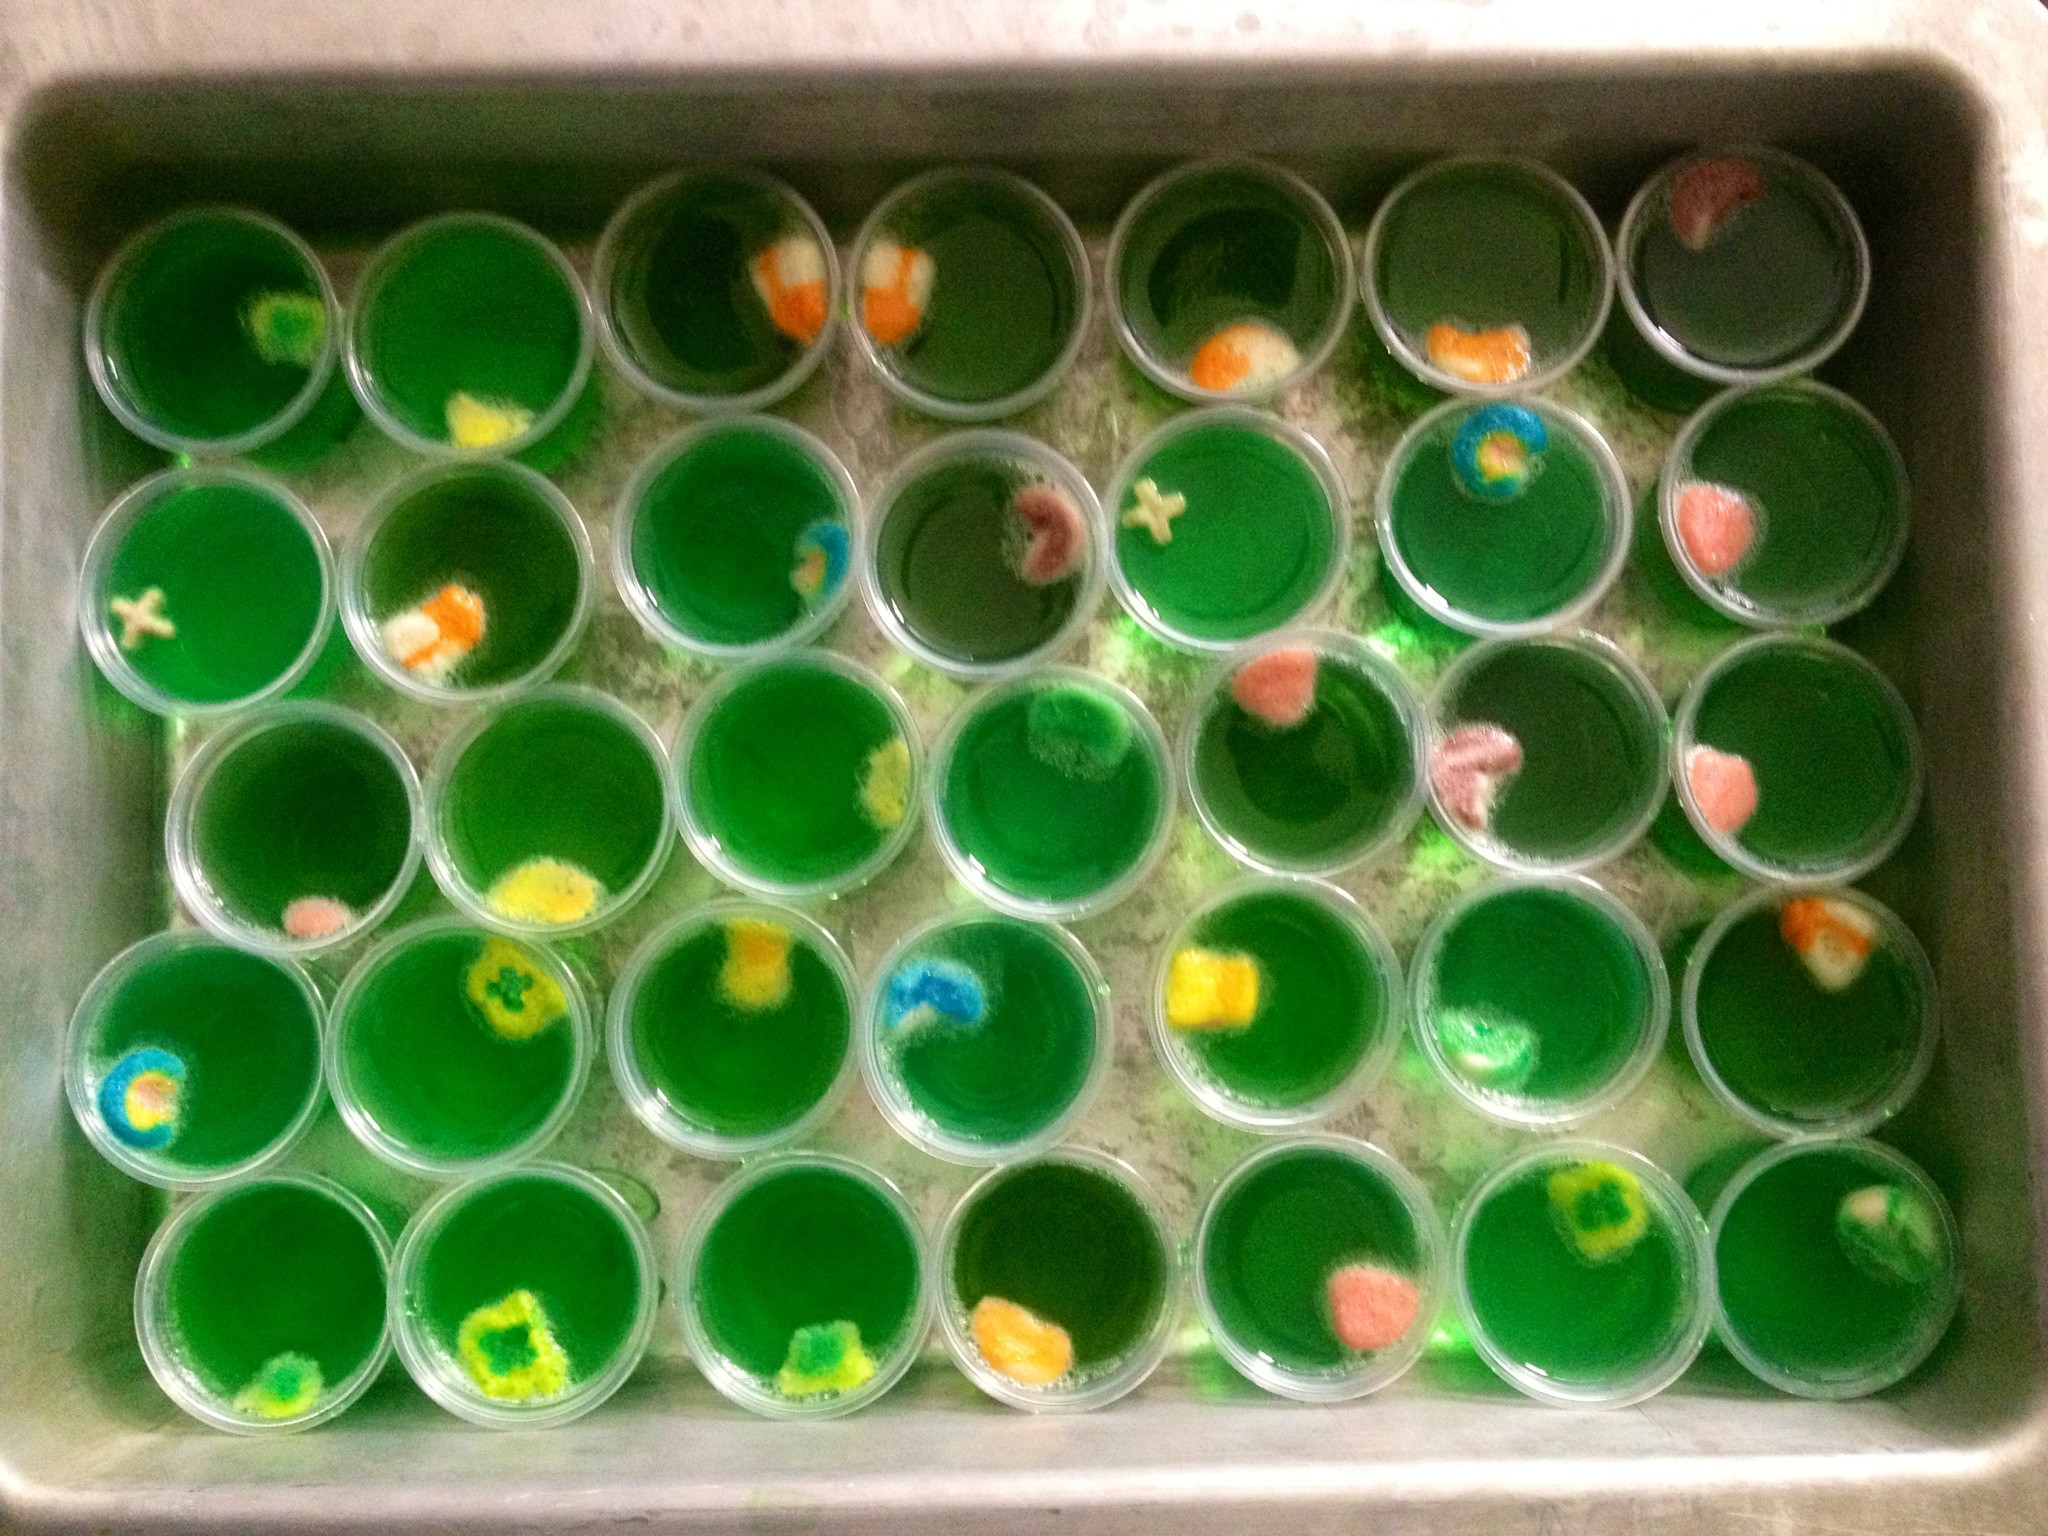 2048x1536 Lucky Charms Jello Shots for St. Patrick's Day. Just wait for the shots to